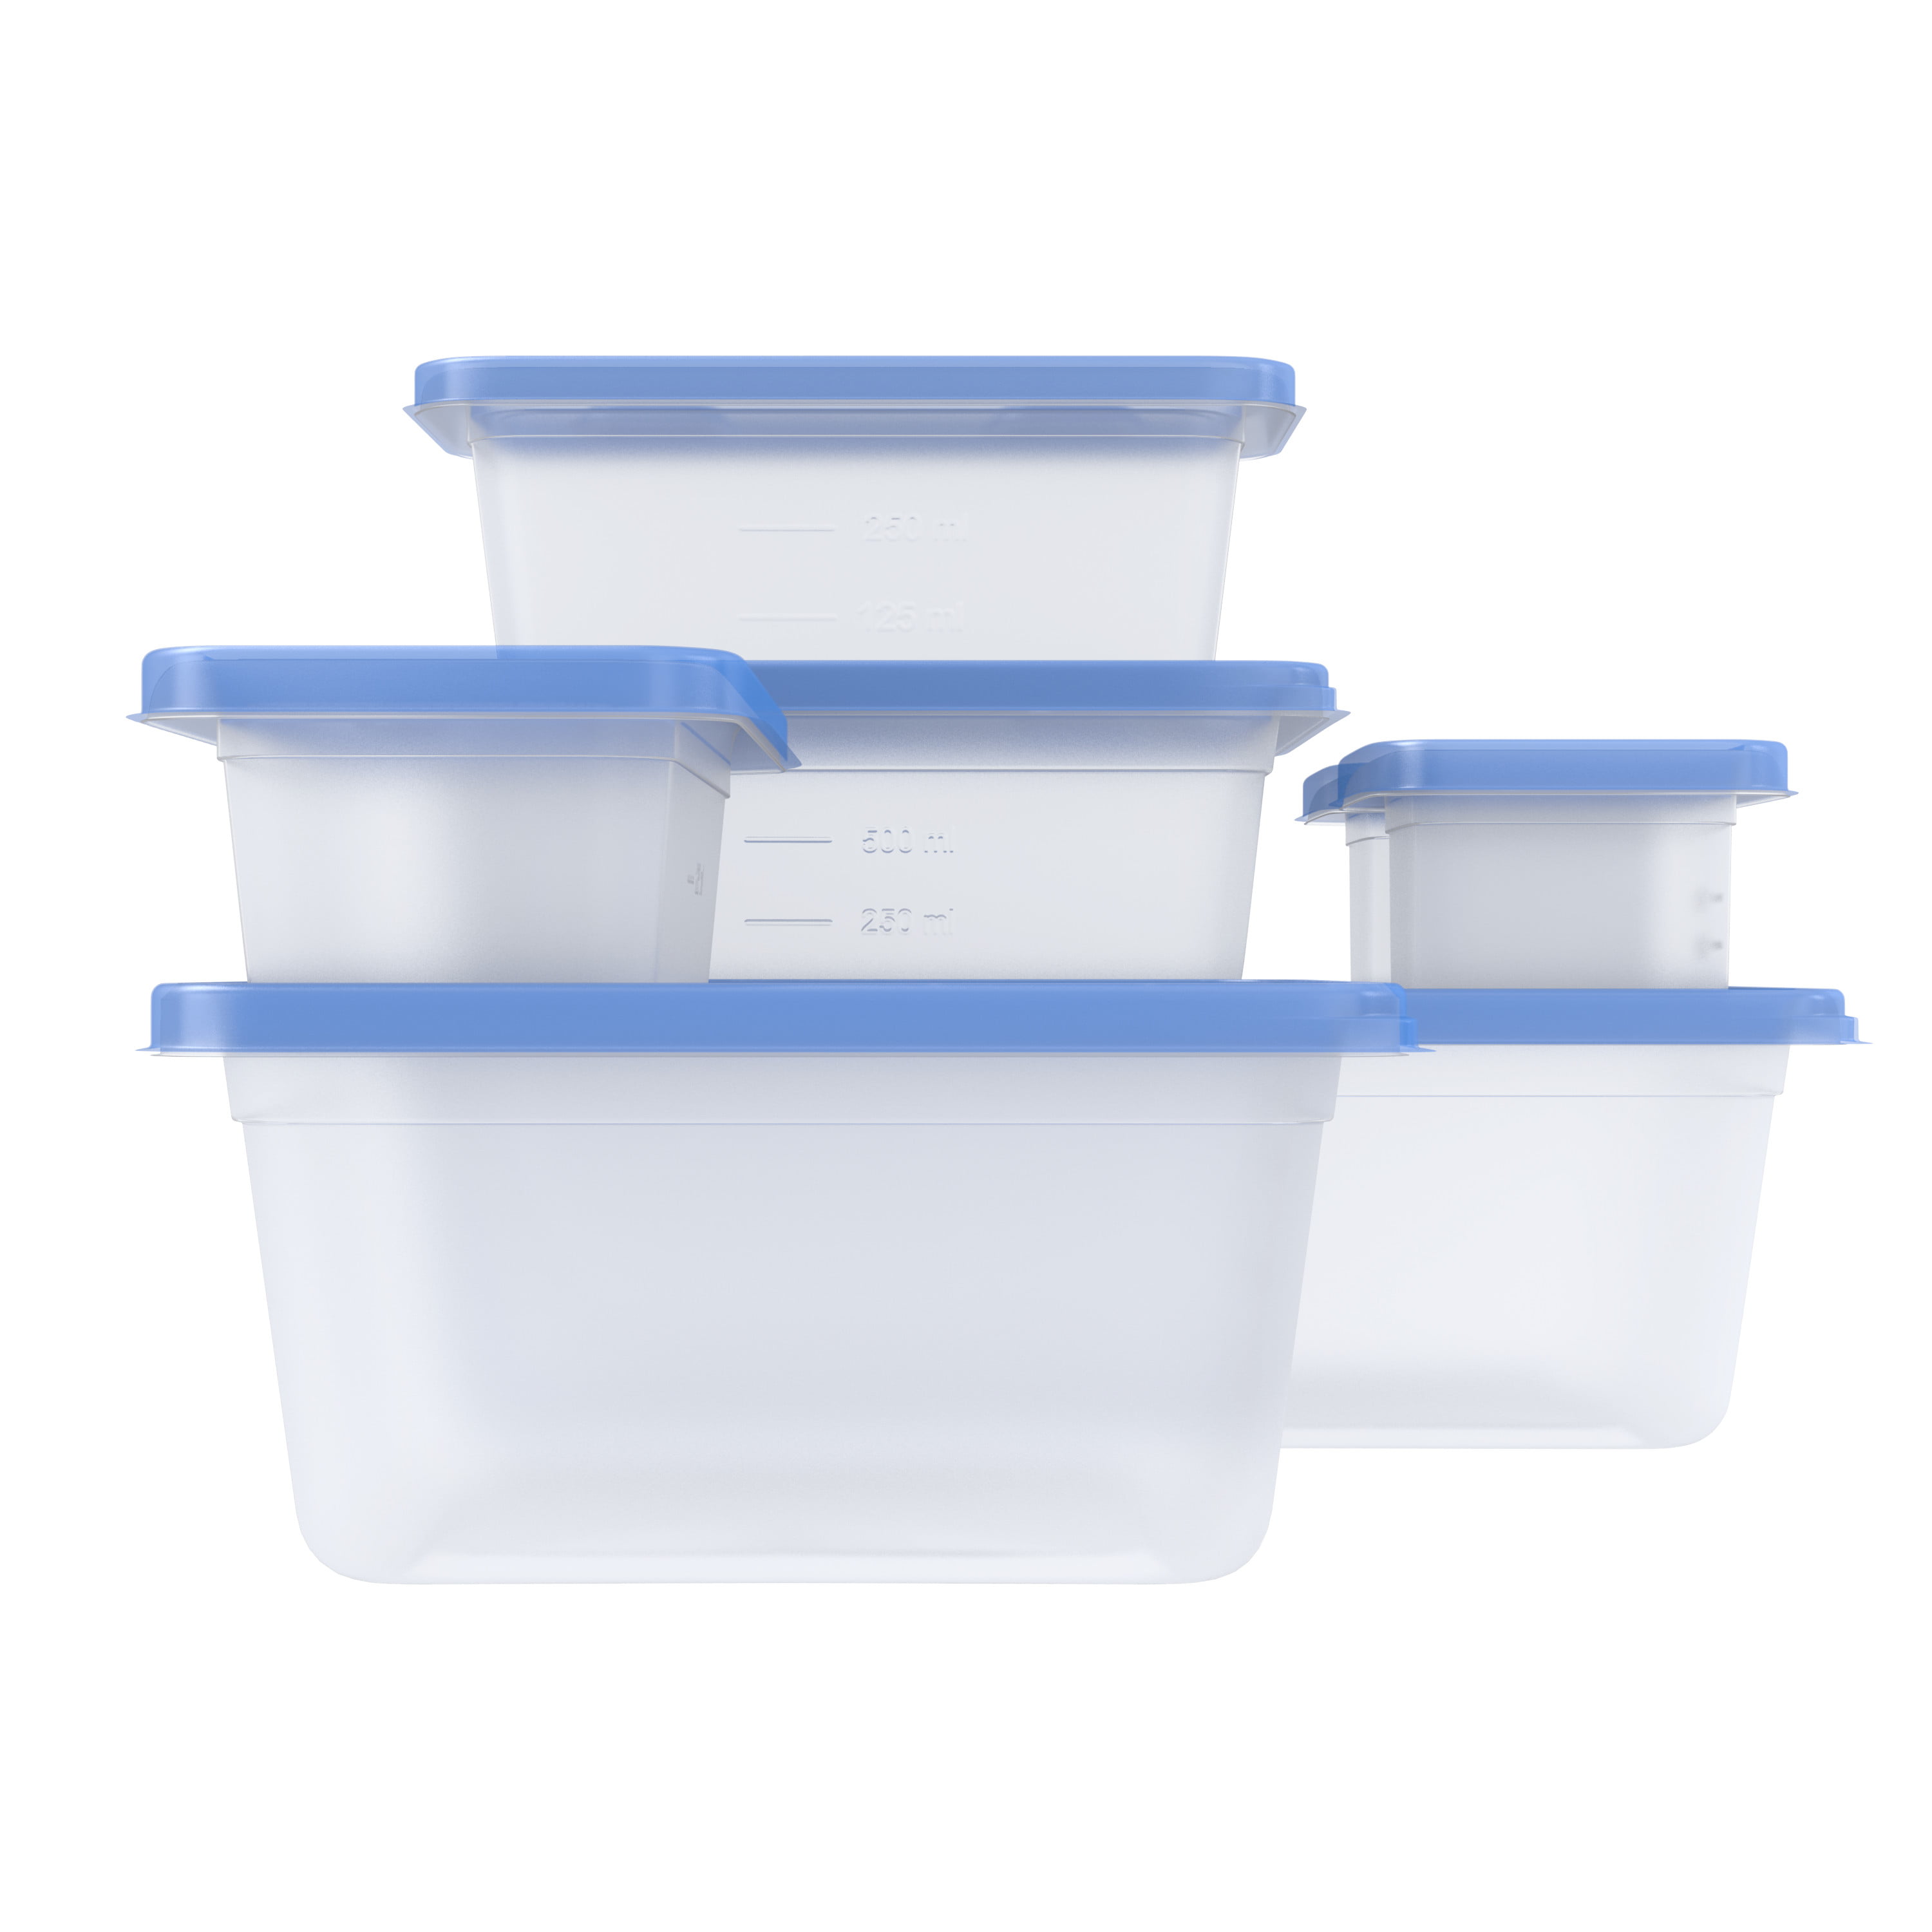 Ziploc® Brand, Food Storage Containers with Lids, One Press Seal